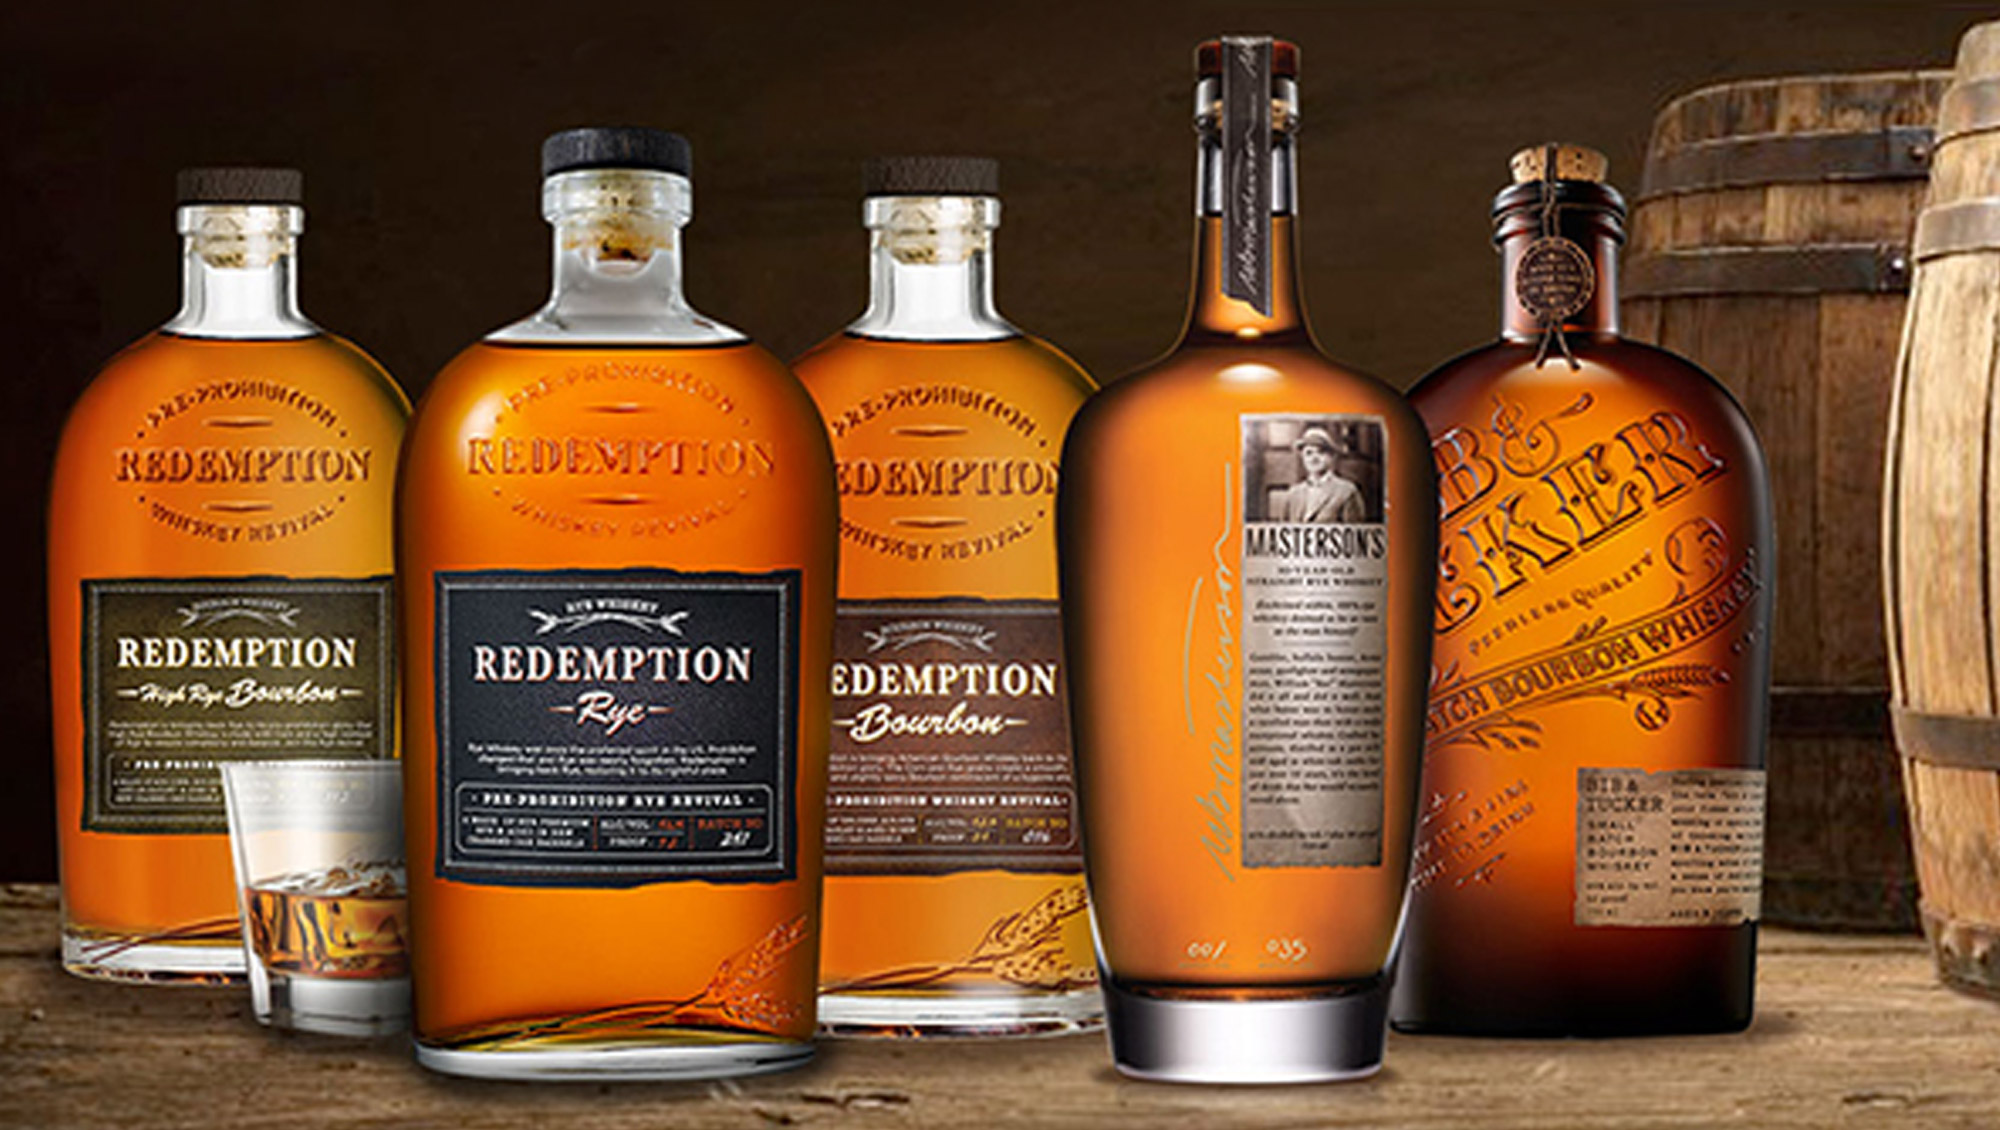 American Whiskey Experience - Redemption Whiskey